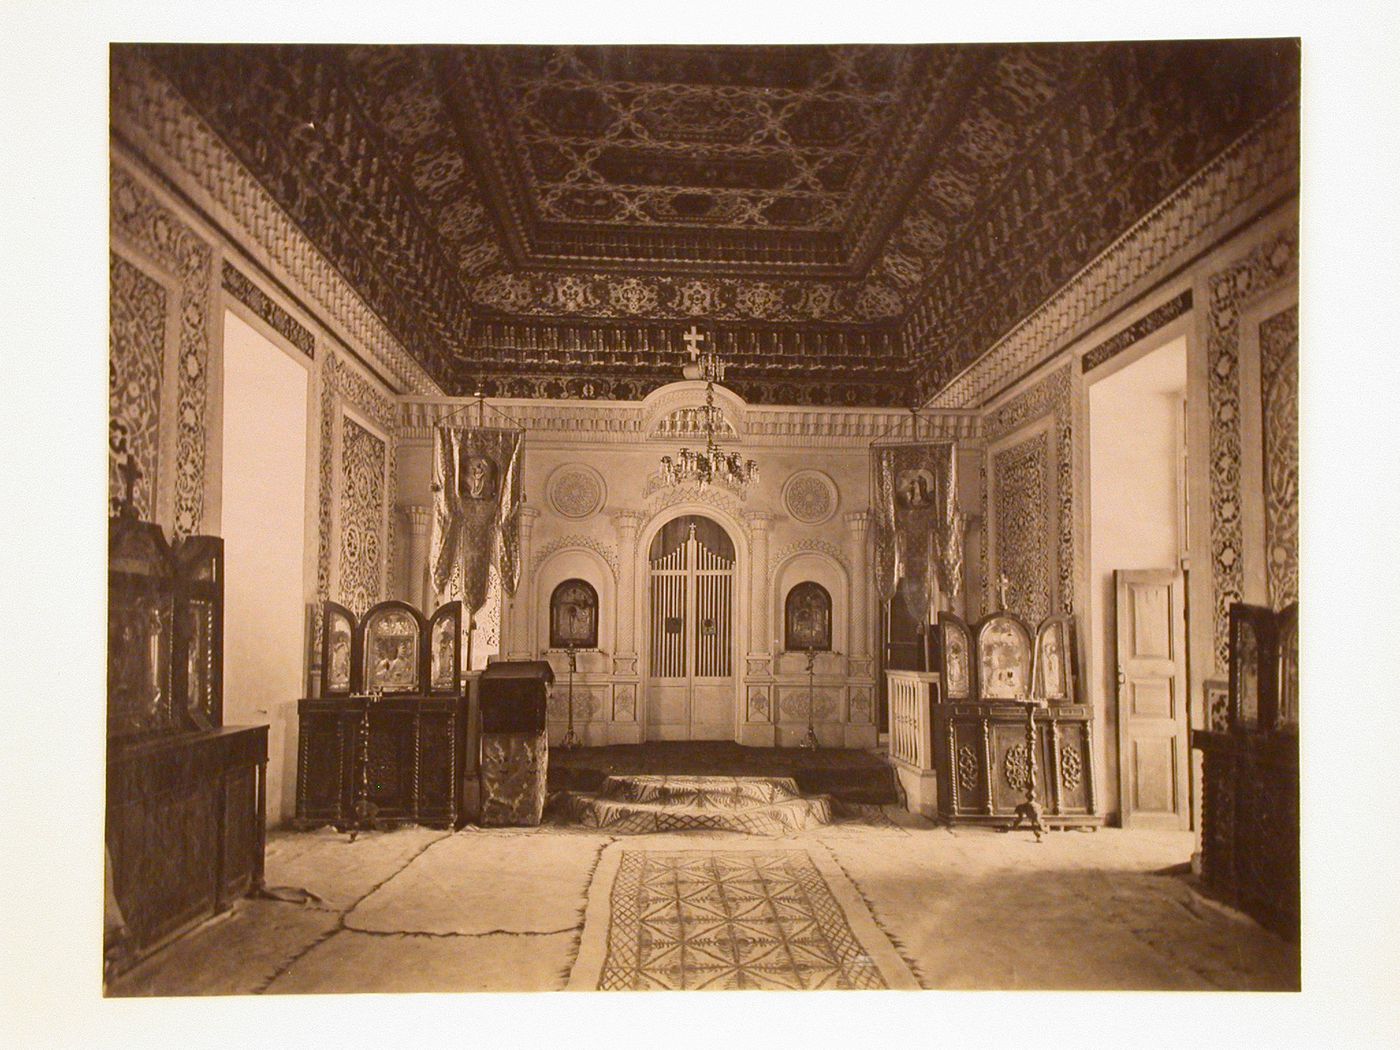 Interior view of a room in the palace of Emile, Bukhara, Uzbekistan, former Soviet Union